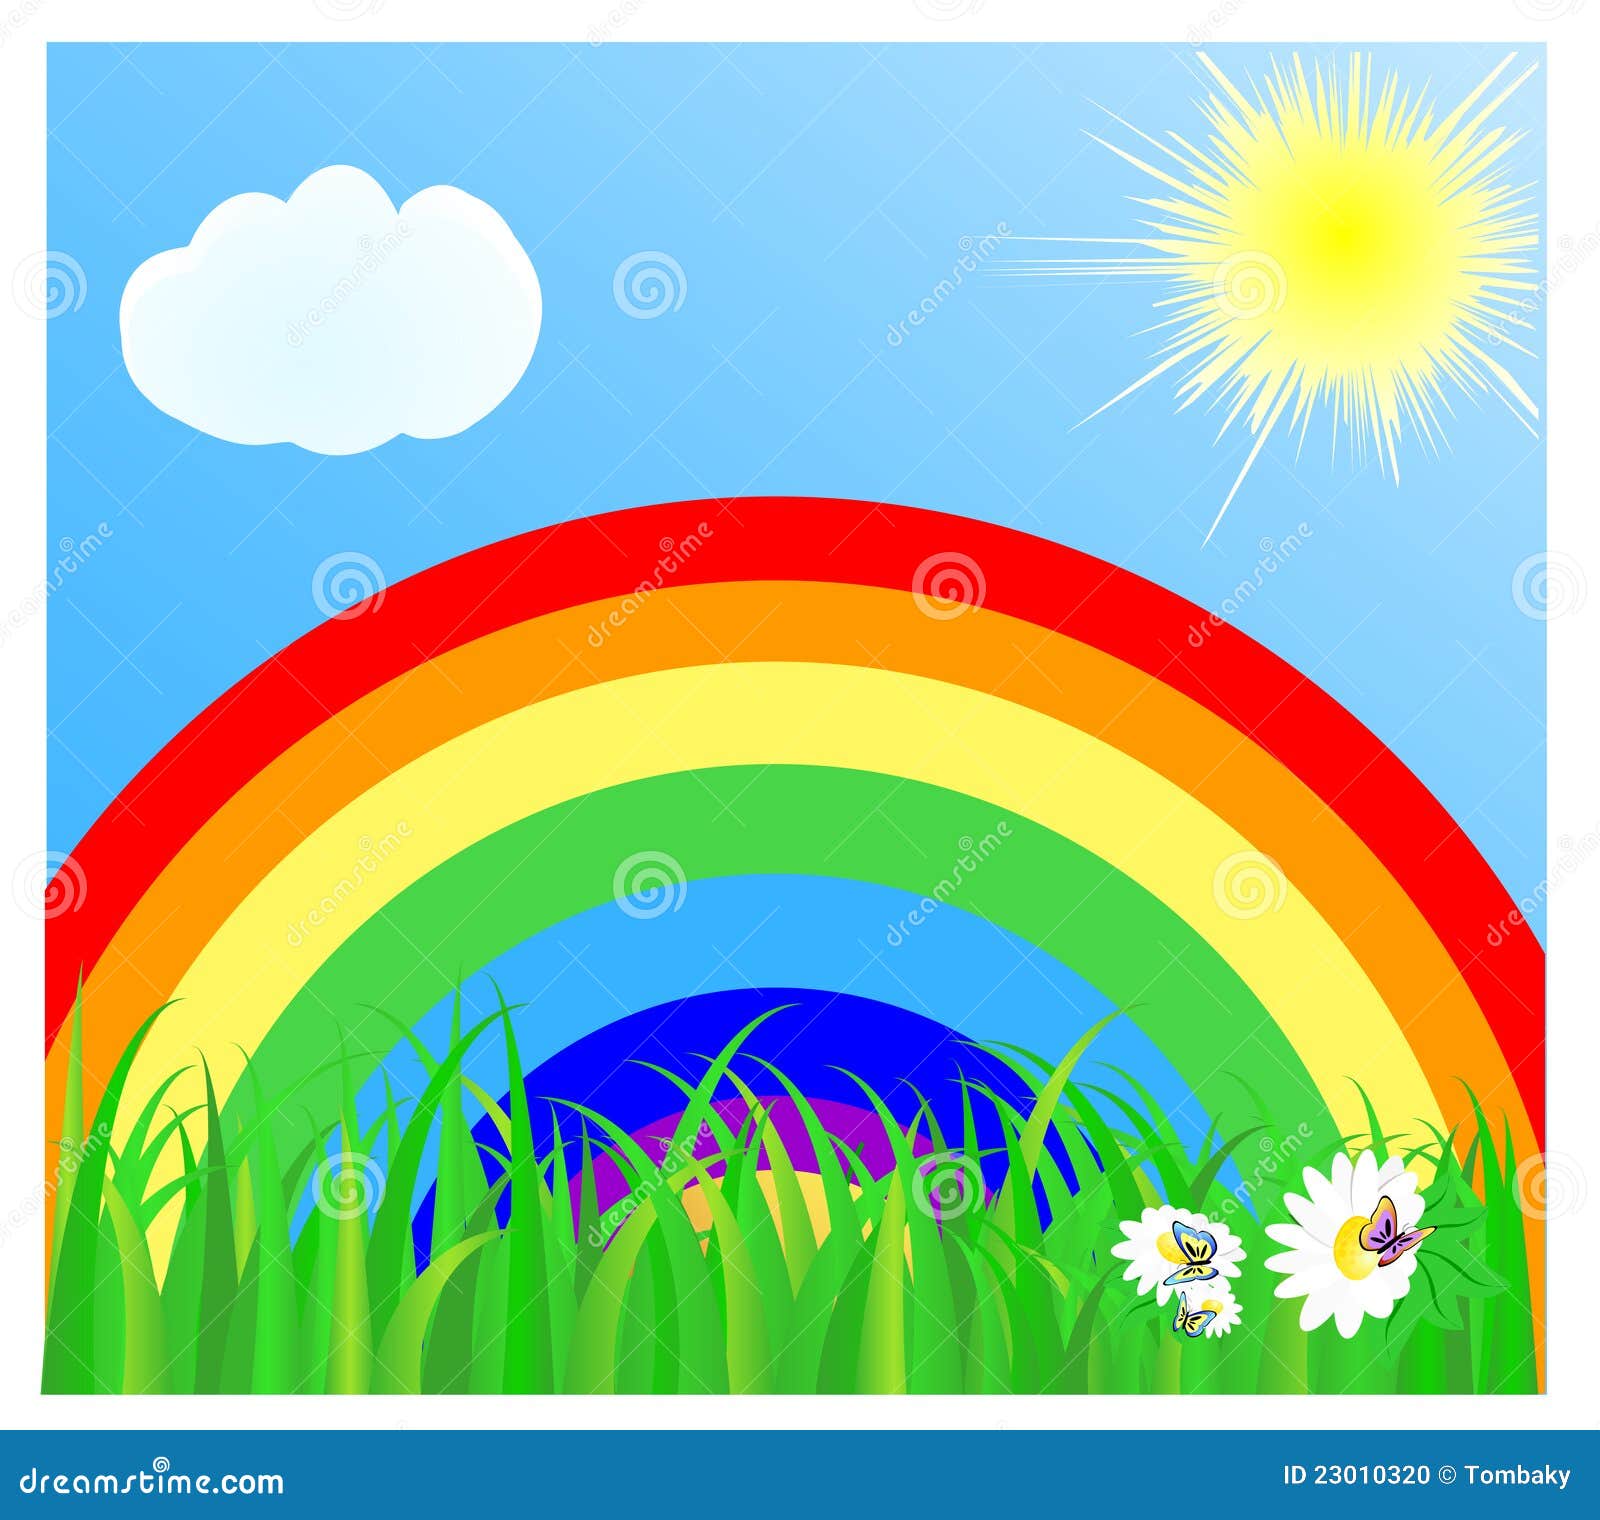 Summer Landscape with a Rainbow Stock Vector - Illustration of design ...